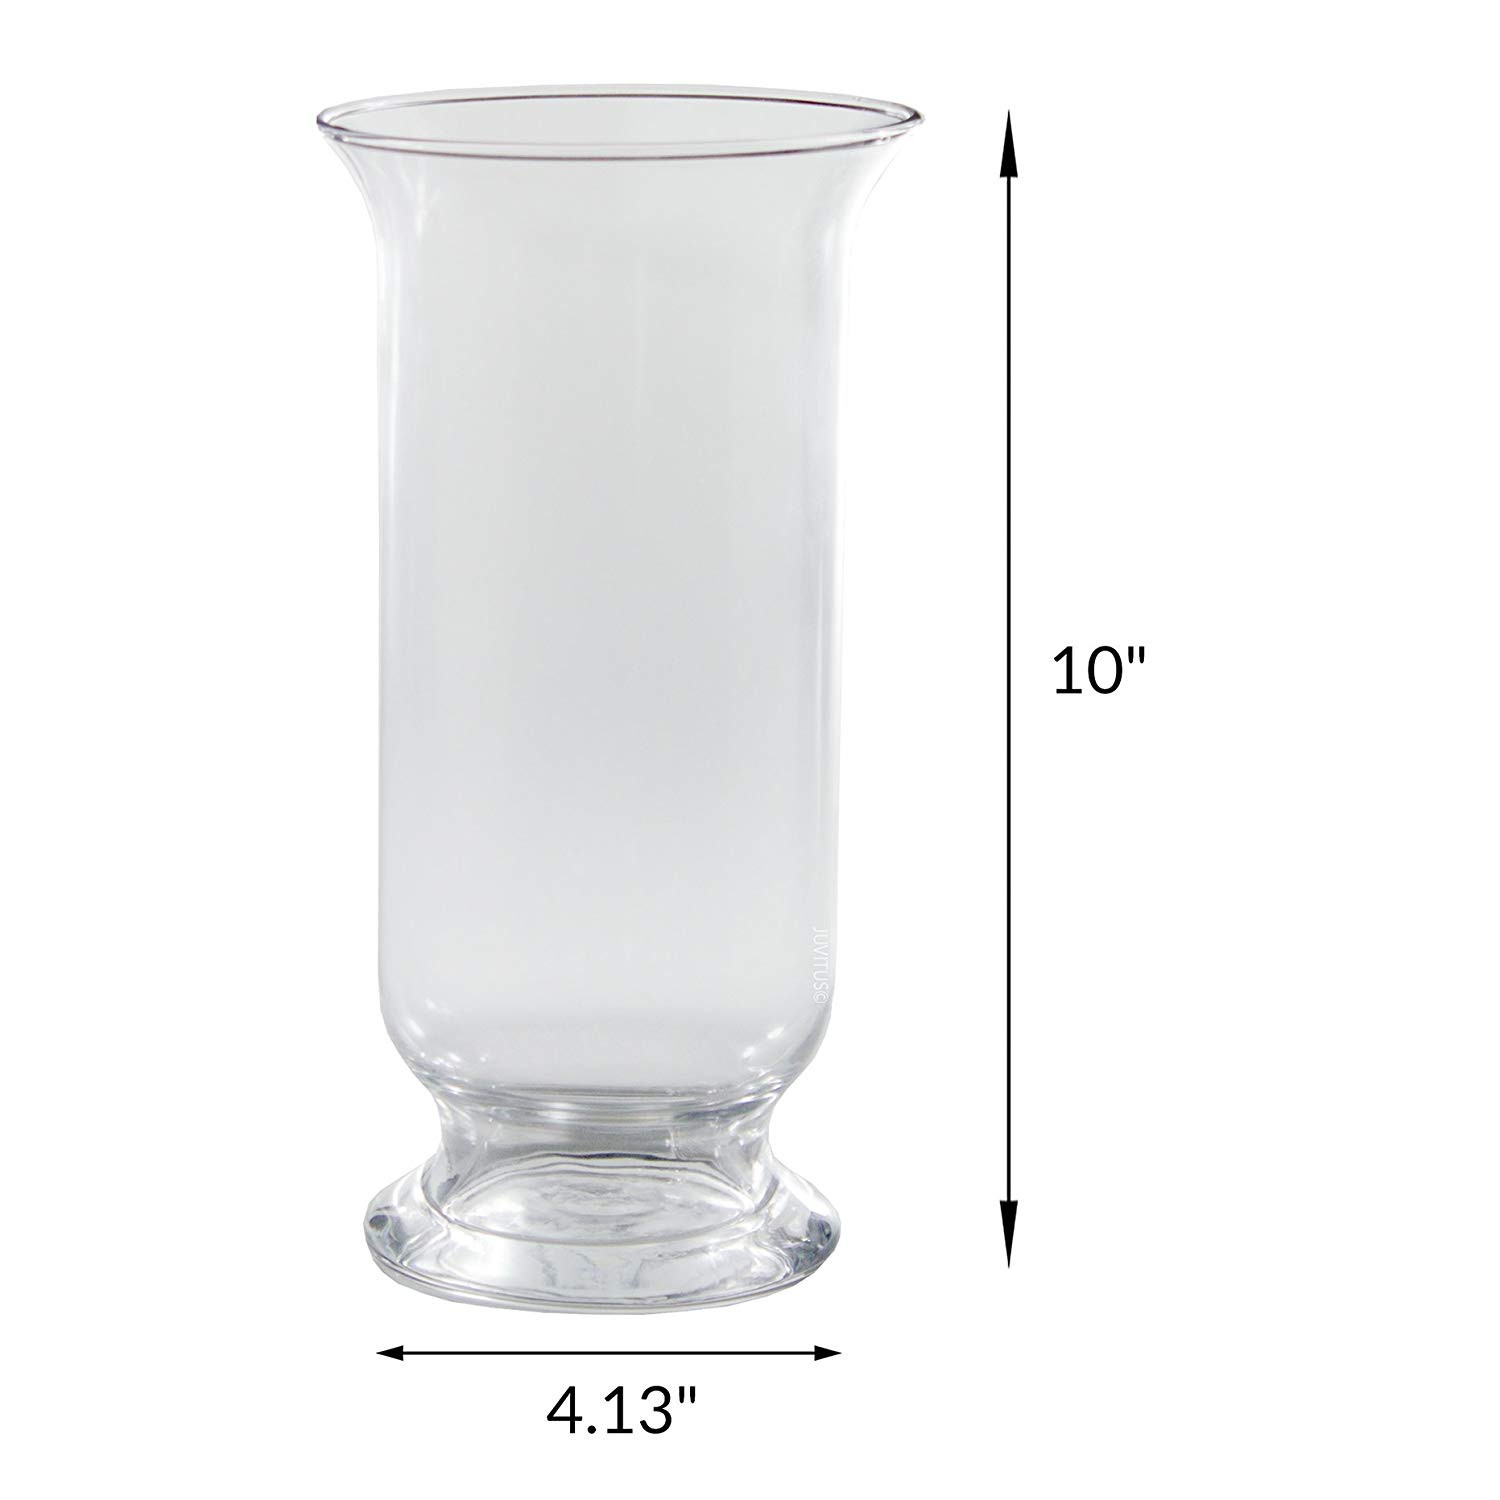 23 attractive Eastland Glass Cylinder Vases Set Of 4 2024 free download eastland glass cylinder vases set of 4 of amazon com 10 tall clear glass pedestal hurricane vase or candle inside amazon com 10 tall clear glass pedestal hurricane vase or candle holder home